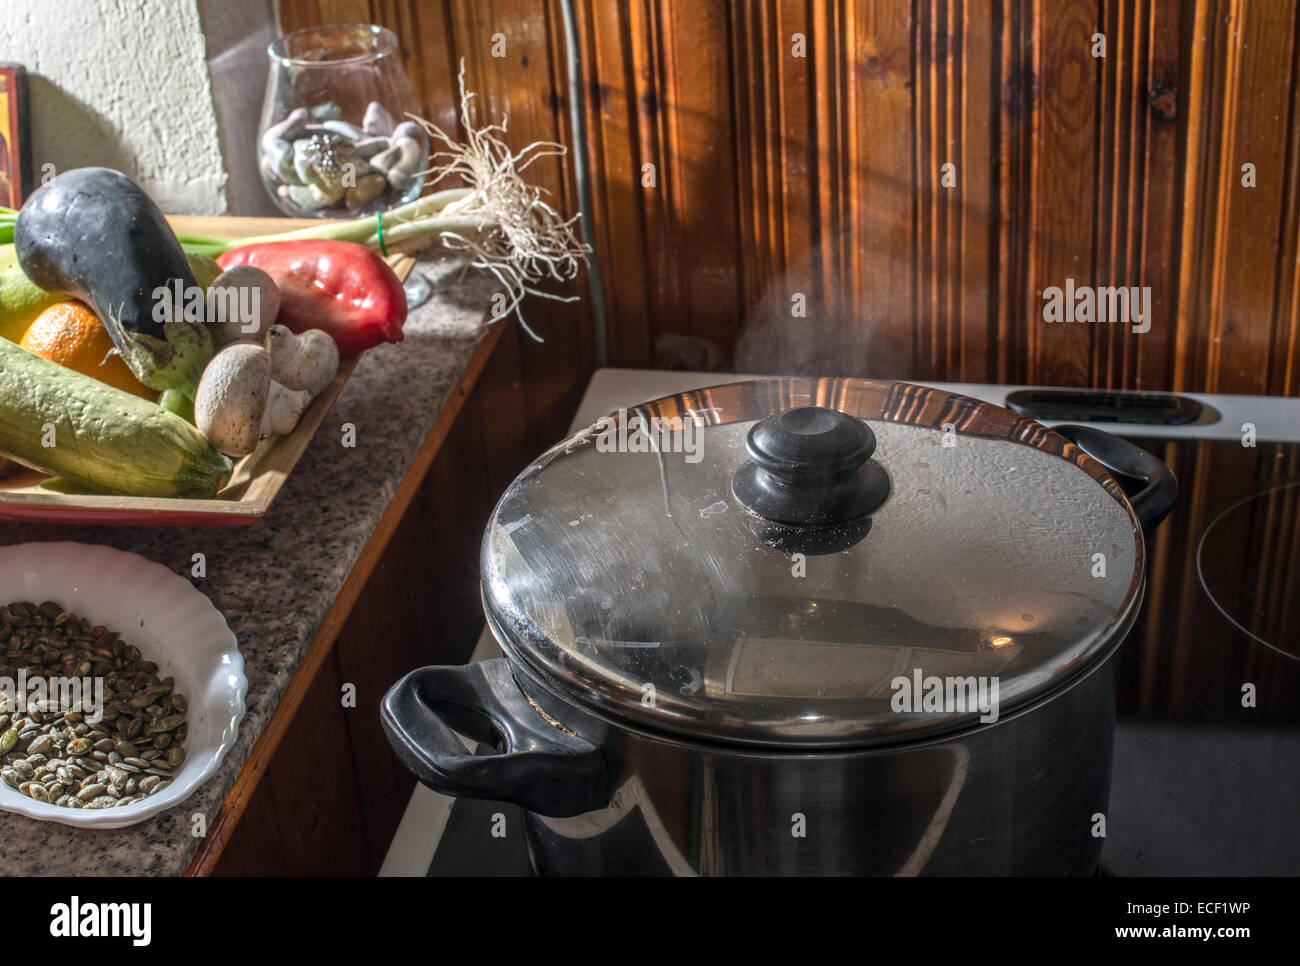 https://c8.alamy.com/comp/ECF1WP/cooking-meat-in-vintage-kitchen-steam-ECF1WP.jpg